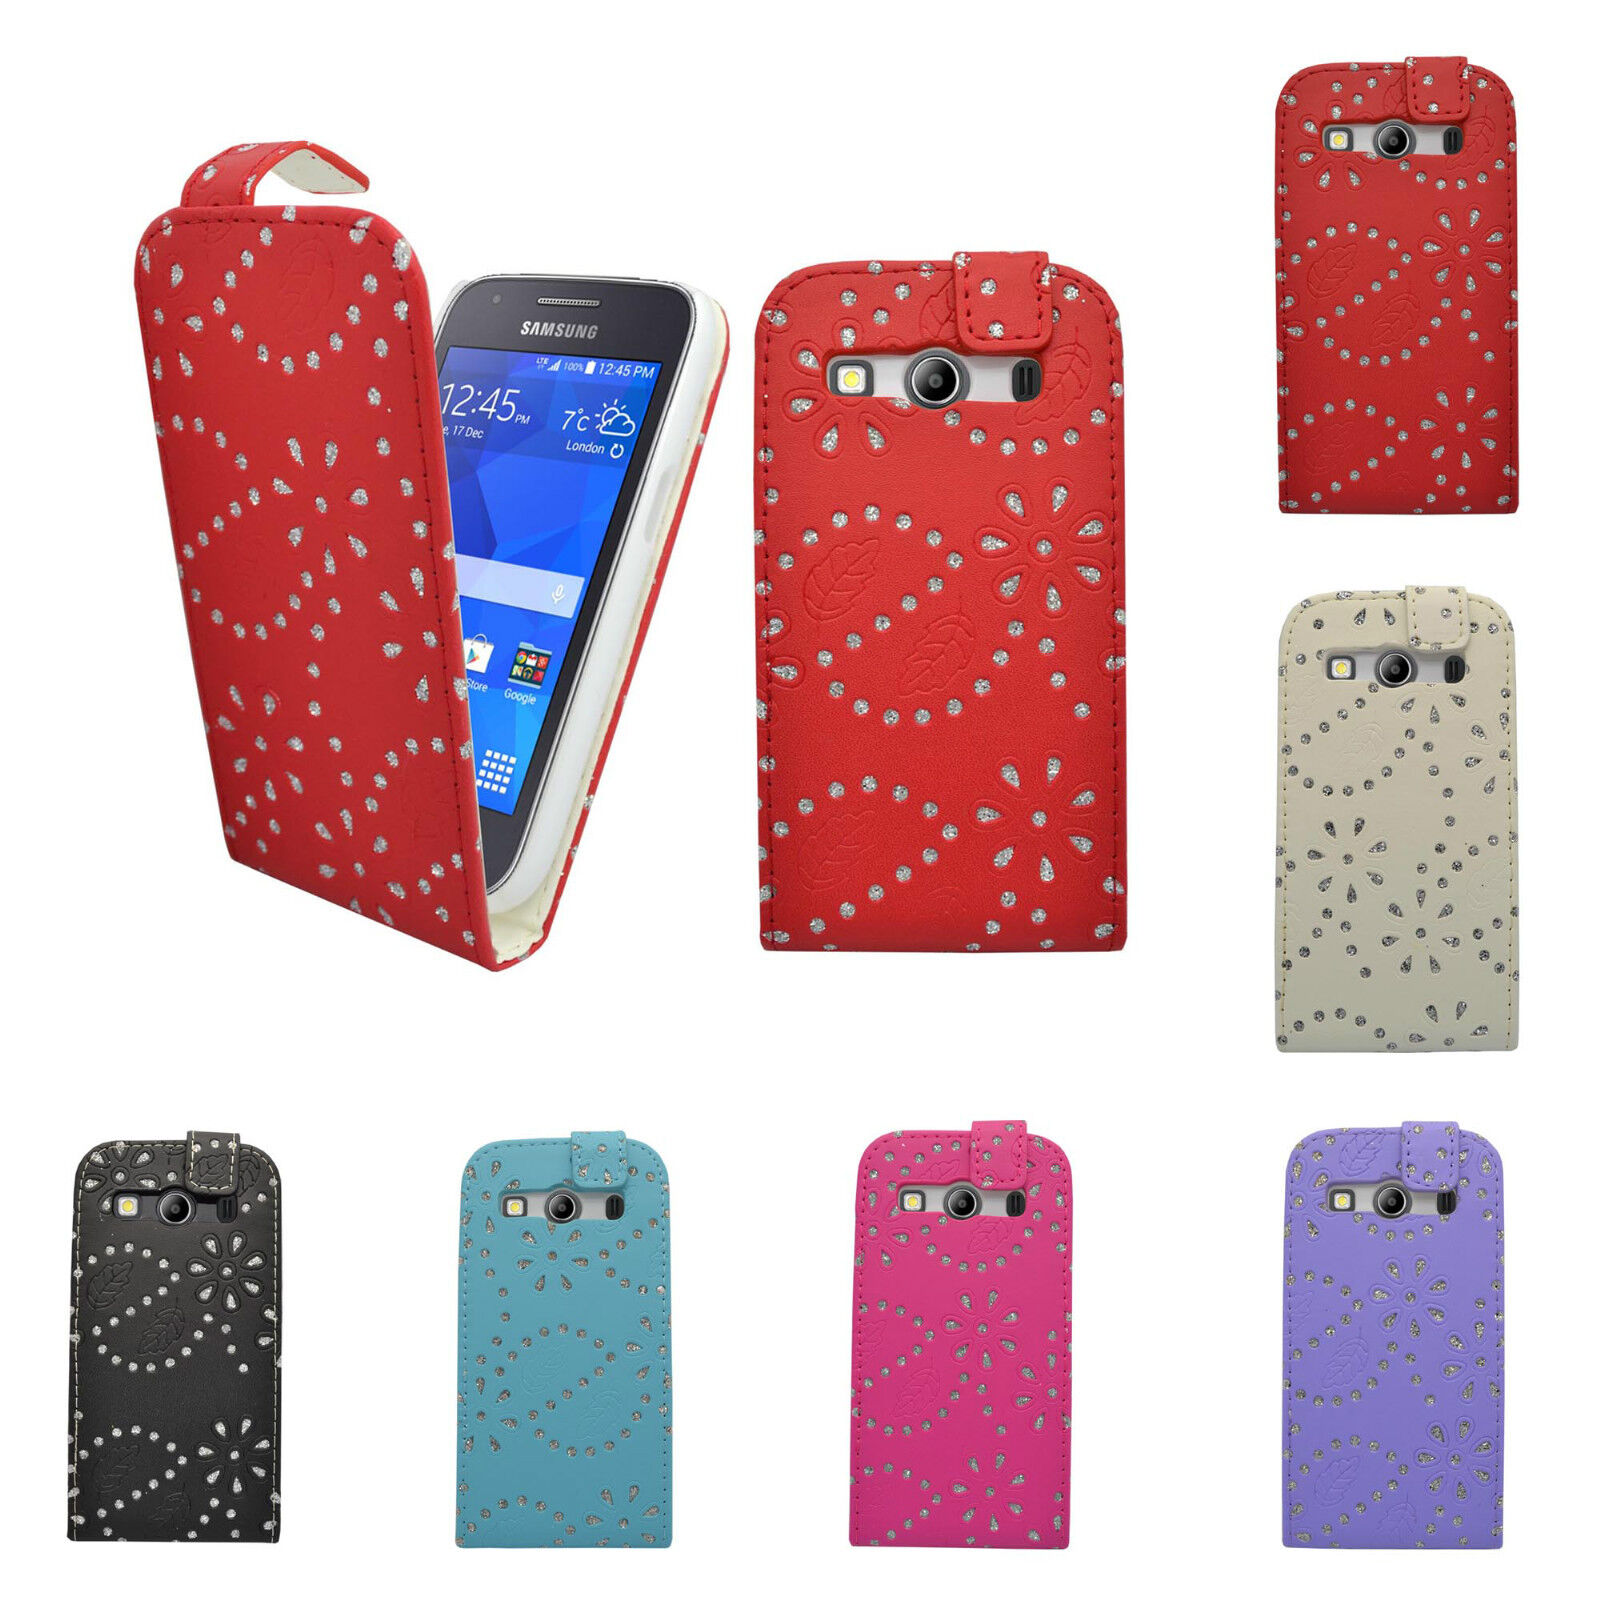 pleegouders Stevig Elementair CASE FOR SAMSUNG GALAXY ACE 4 GLITTER FLIP PU LEATHER POUCH PHONE COVER |  eBay